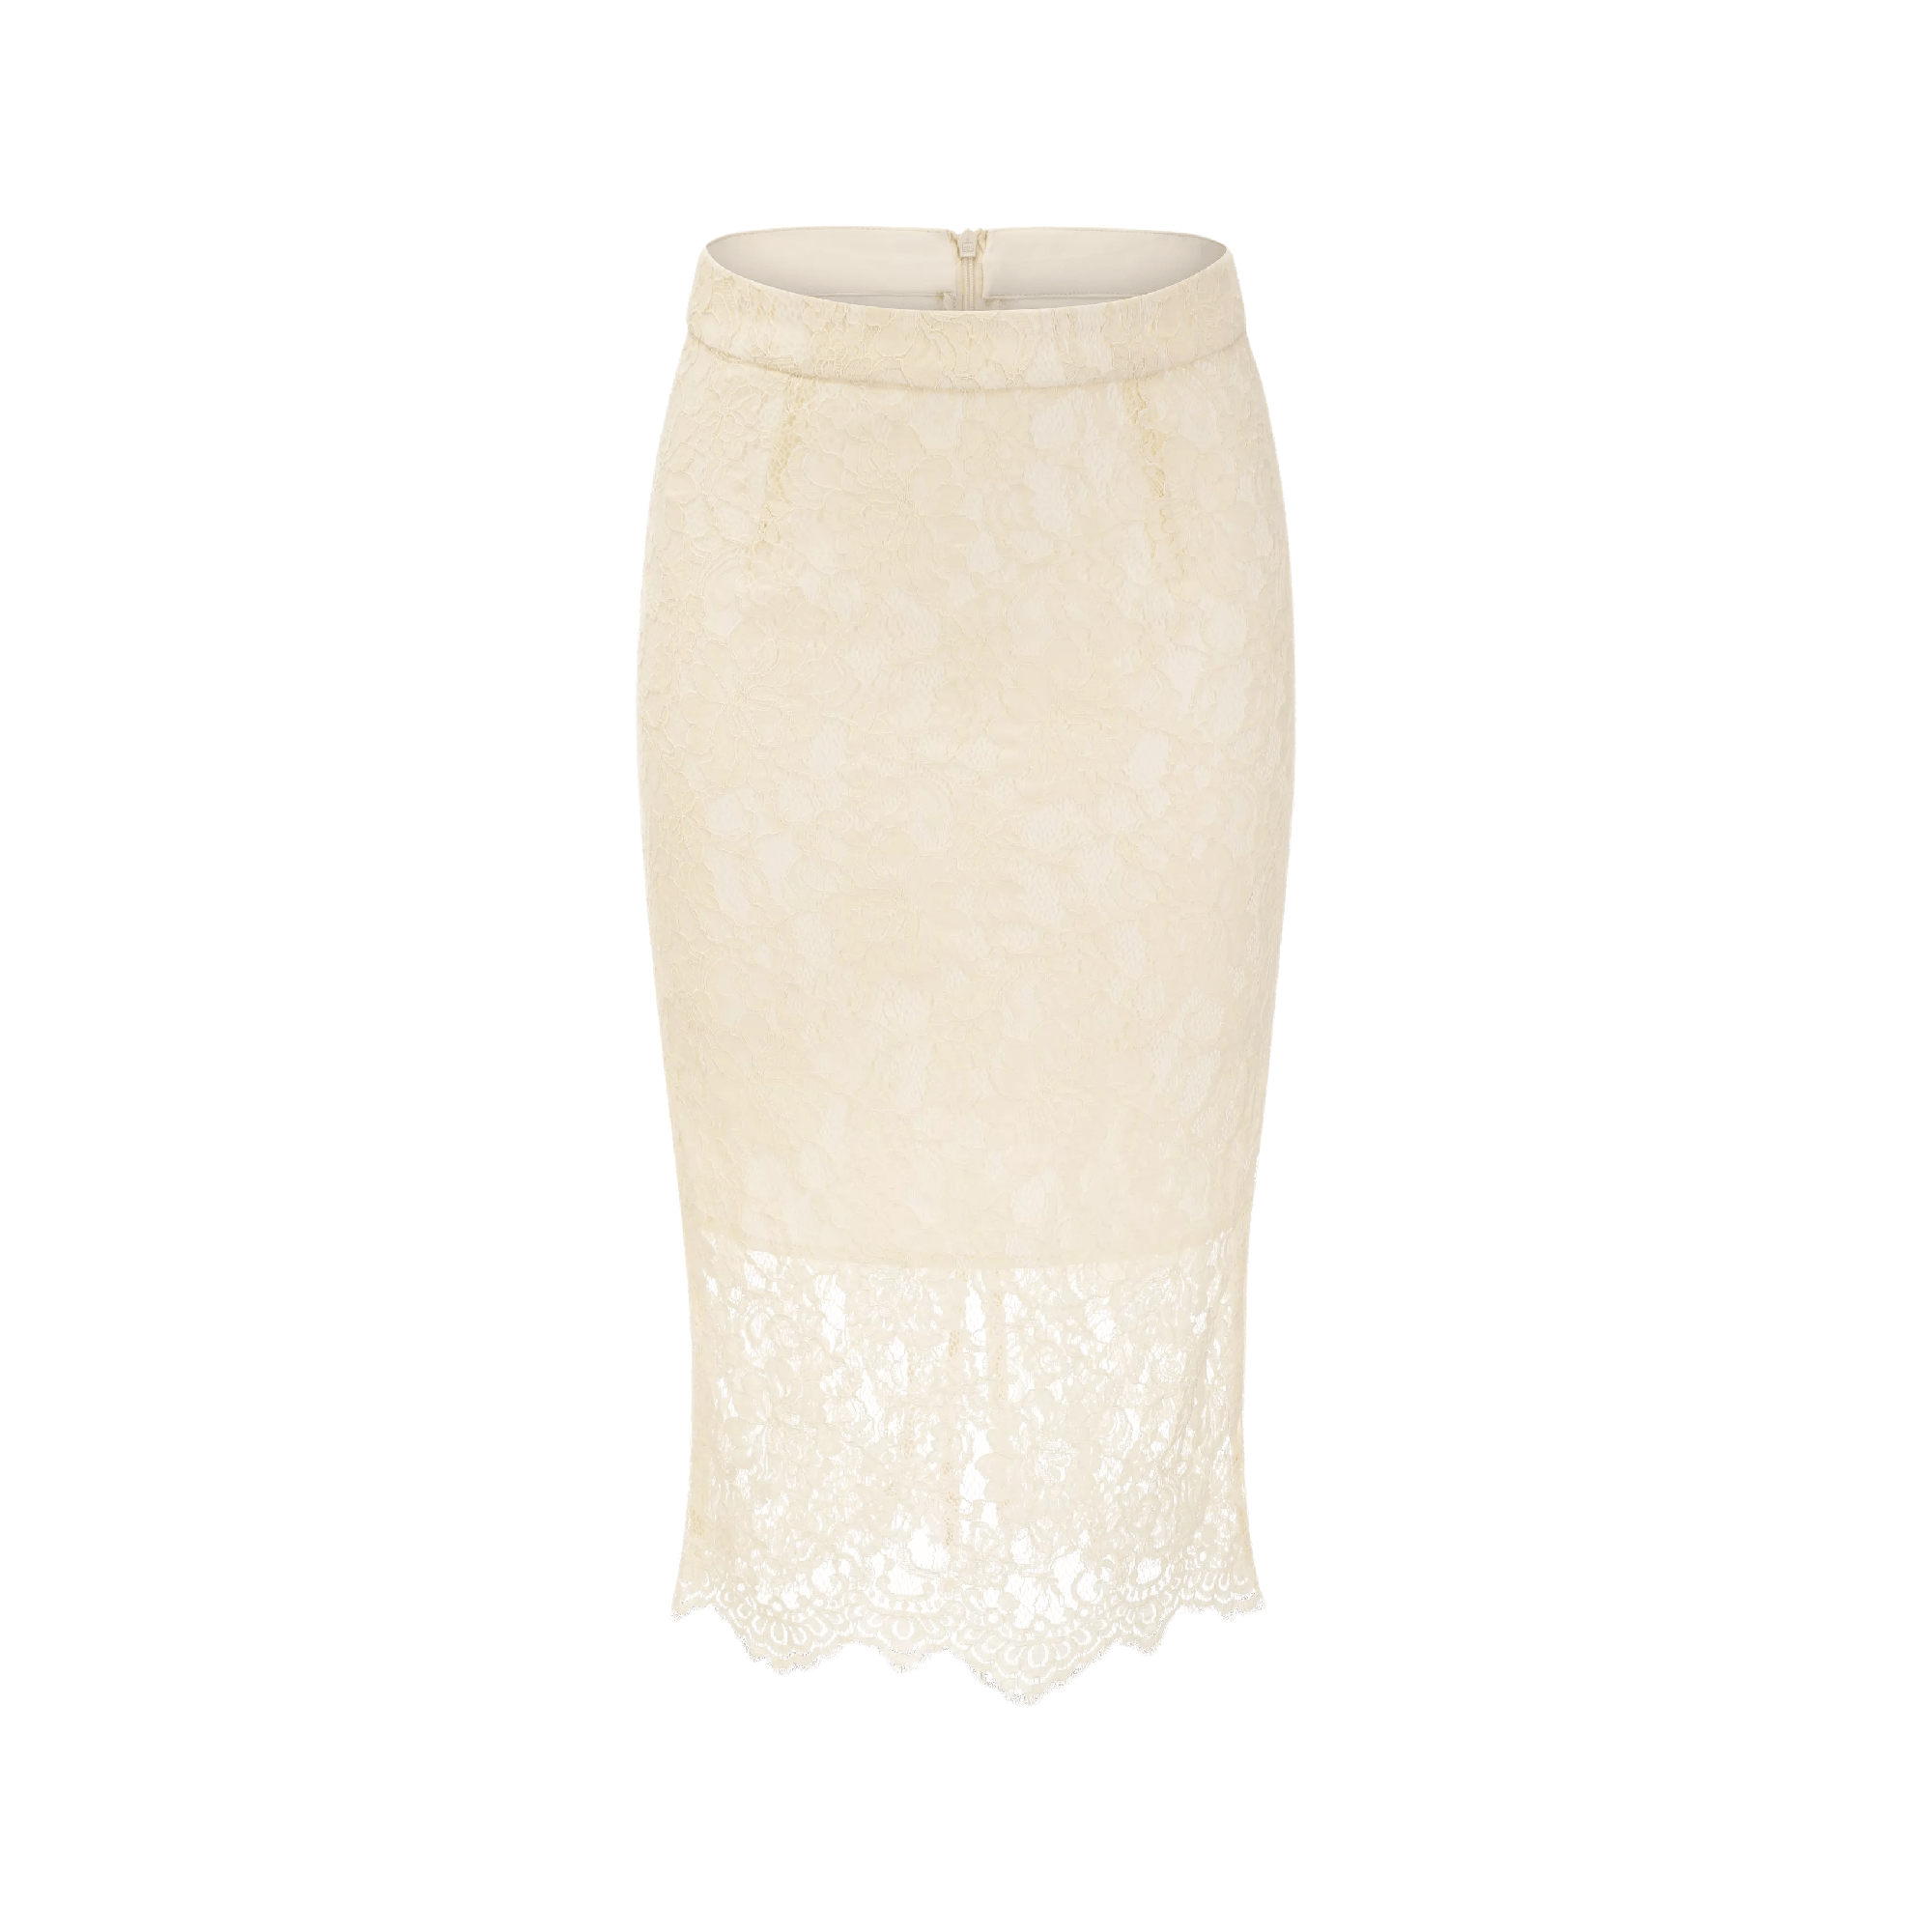 We Can’t Stop-embroidered long skirt - itsy, it‘s different